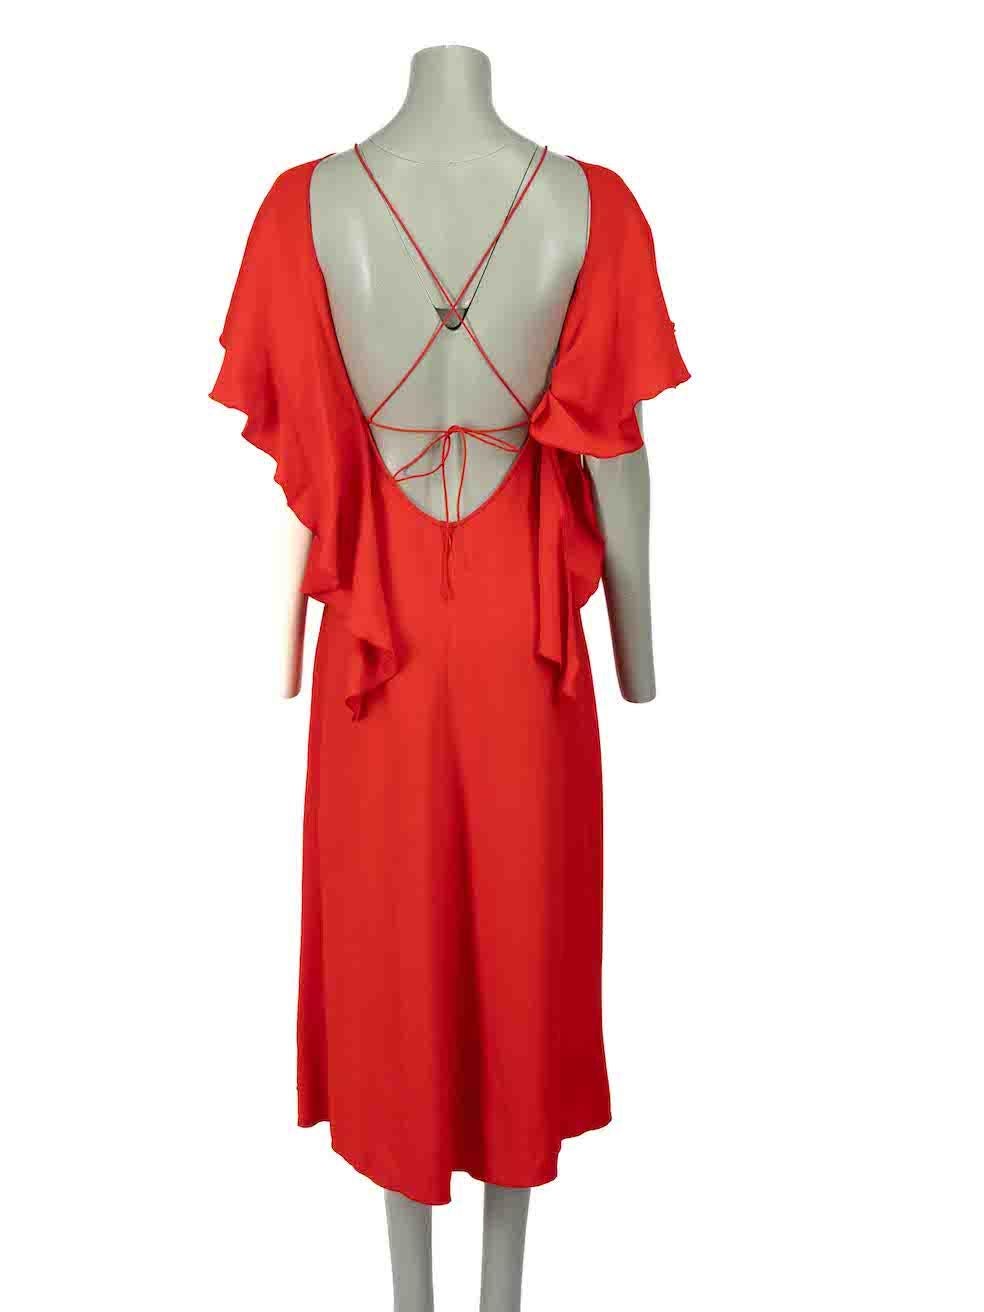 Victoria Beckham Red Strappy Open Back Midi Dress Size XXS In Excellent Condition For Sale In London, GB